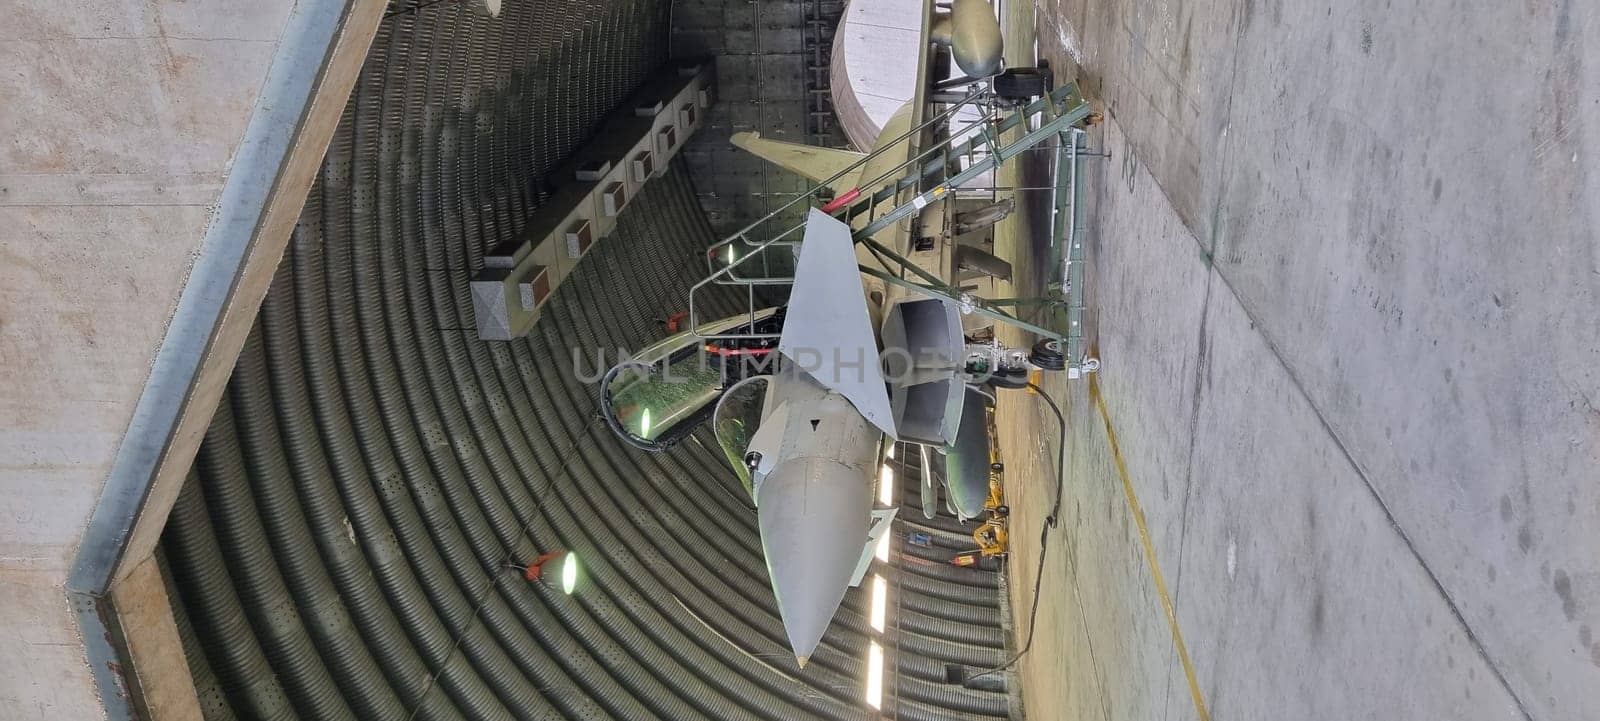 Modern Defense Aircraft in Armored Shelter Ready for Takeoff, Vertical Photo by FlightVideo